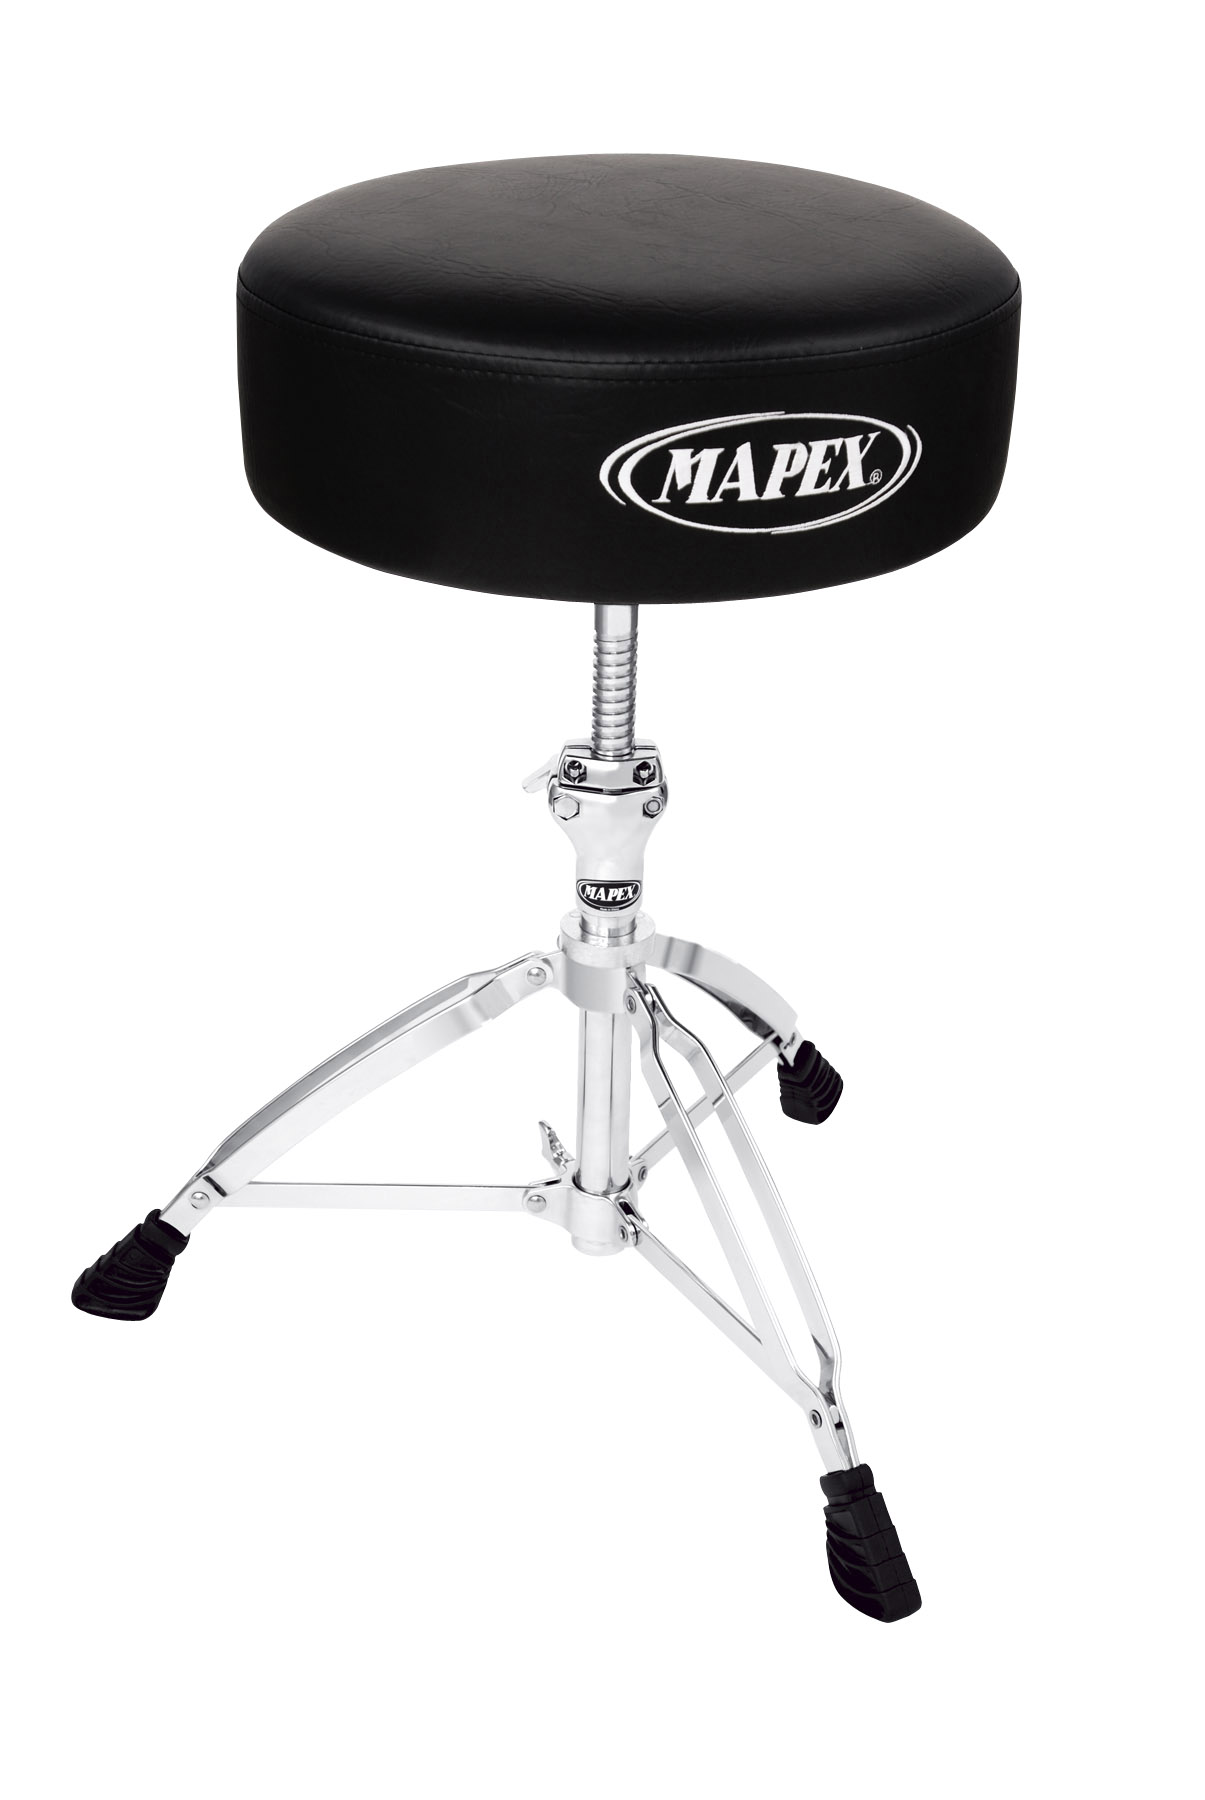 Mapex Mapex T750A Drum Throne, Double-Braced